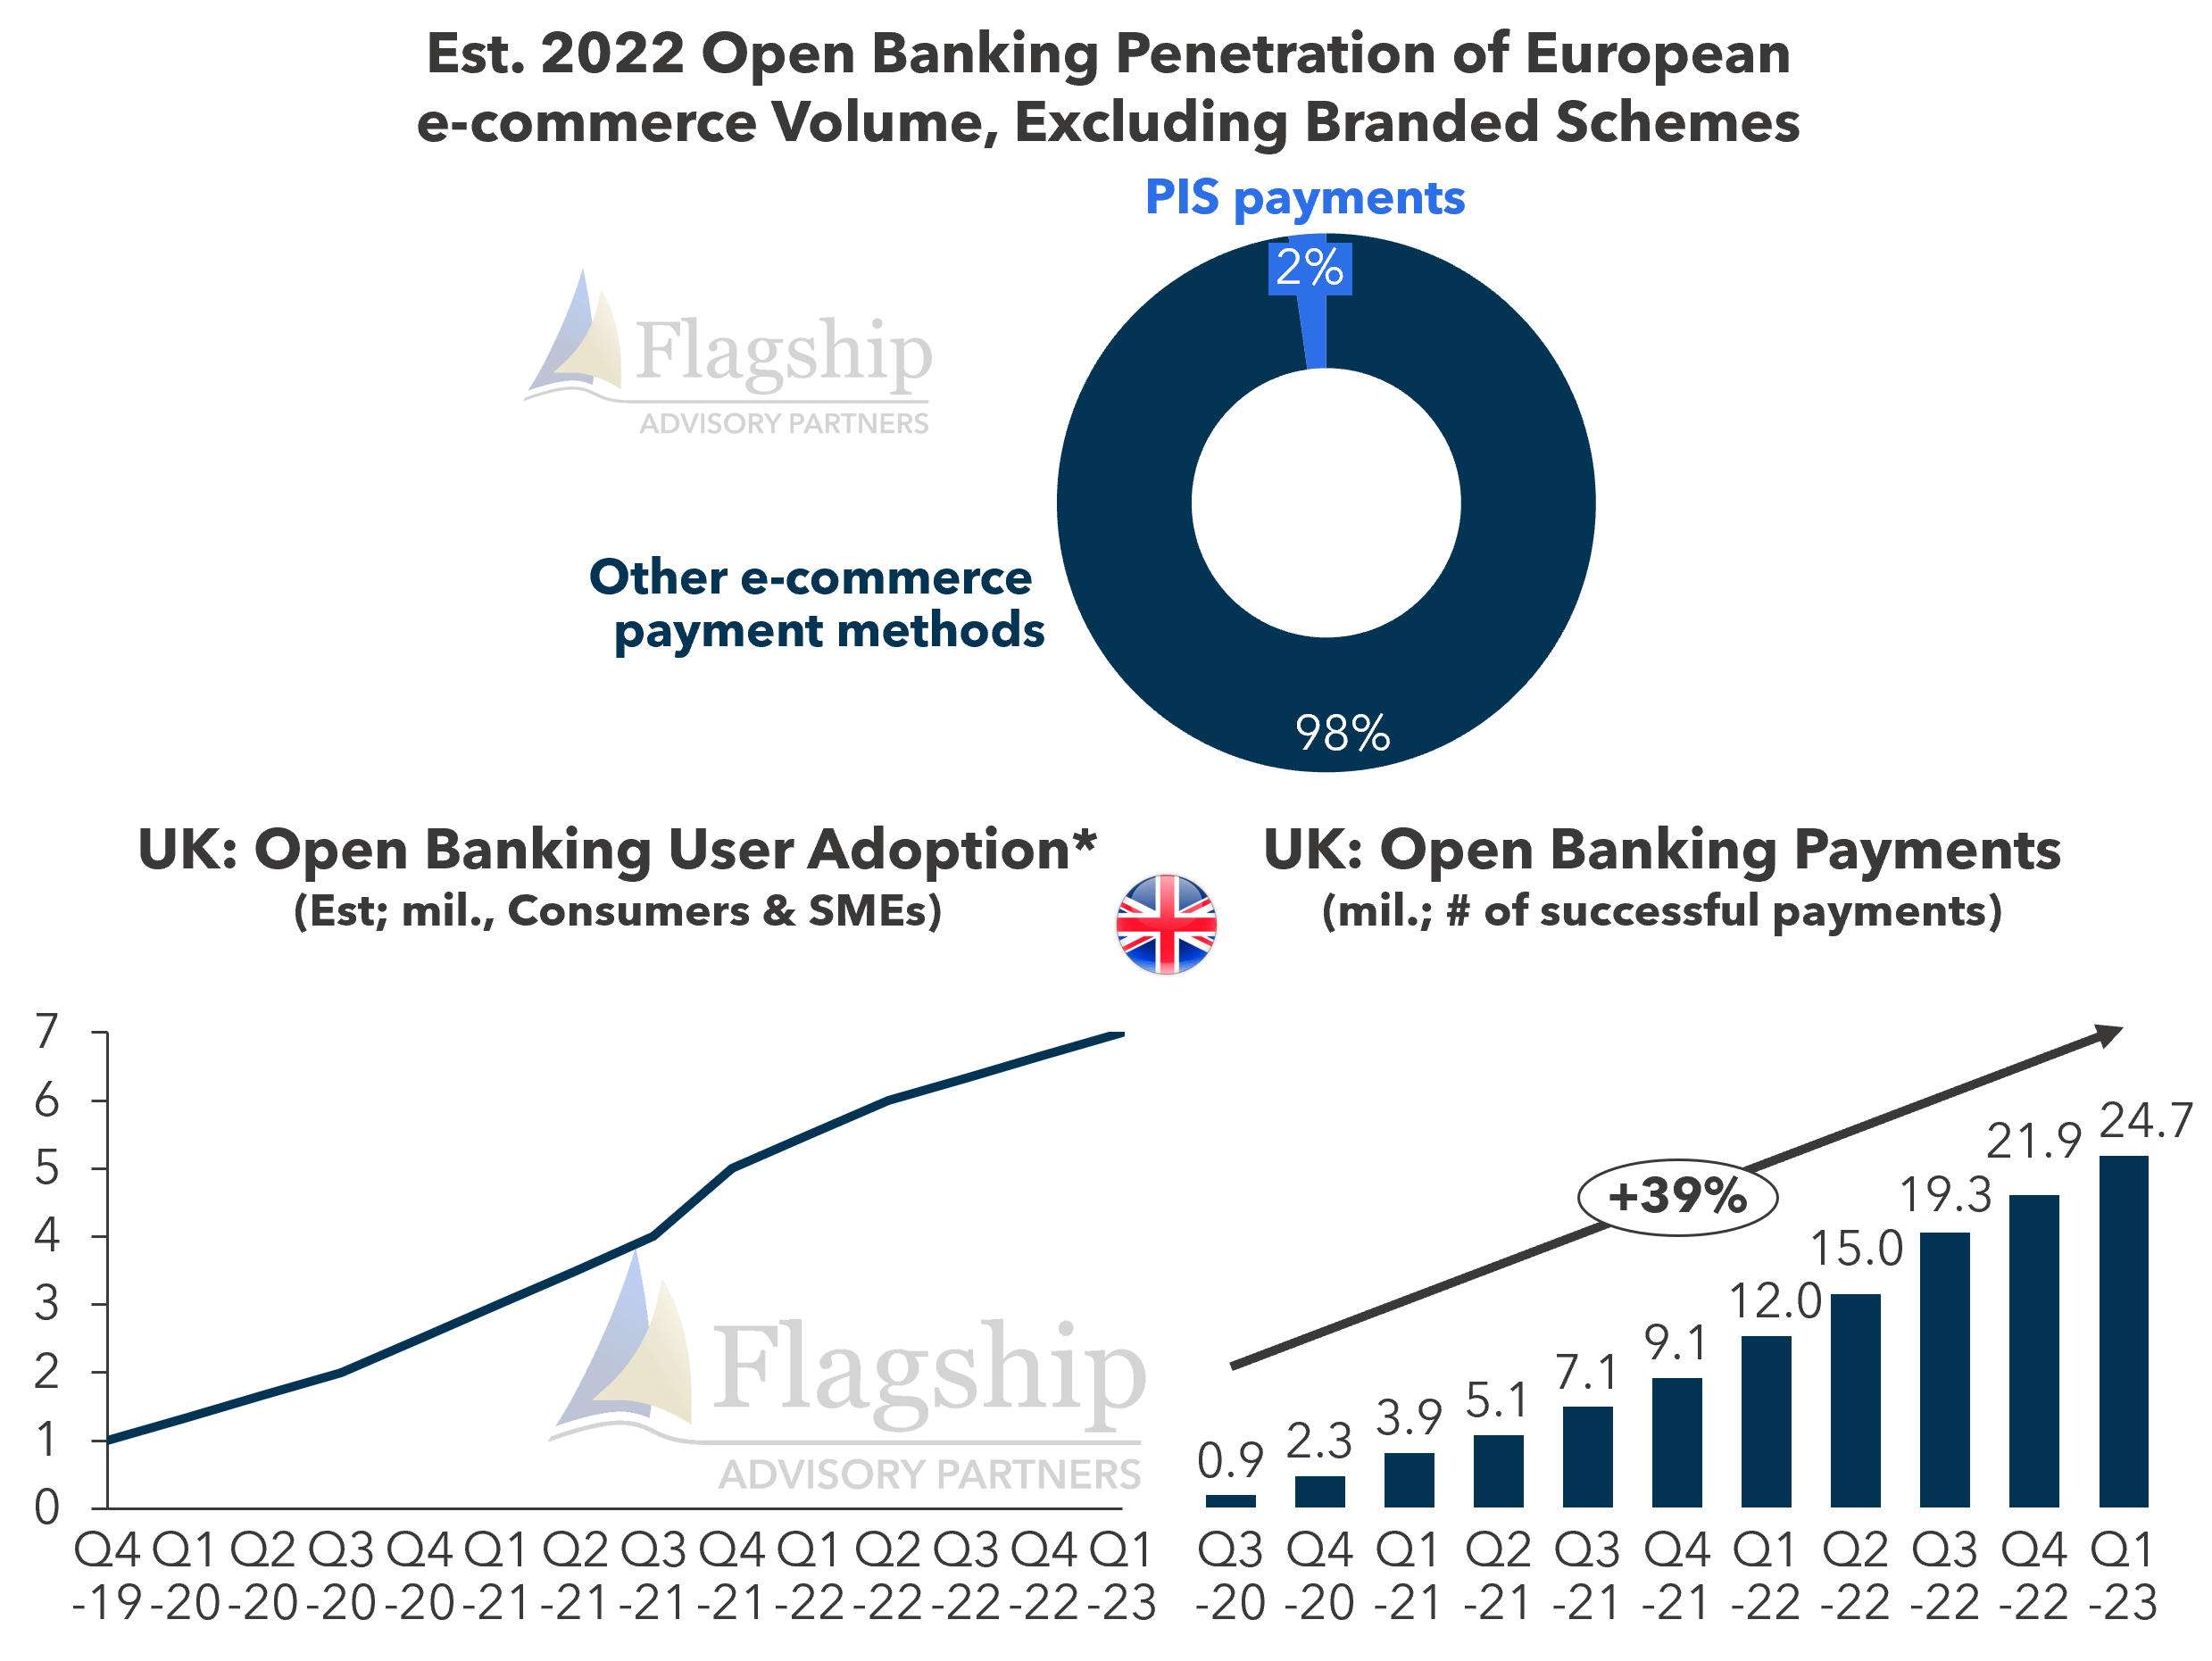 Penetration of Open Banking payments, excluding branded schemes